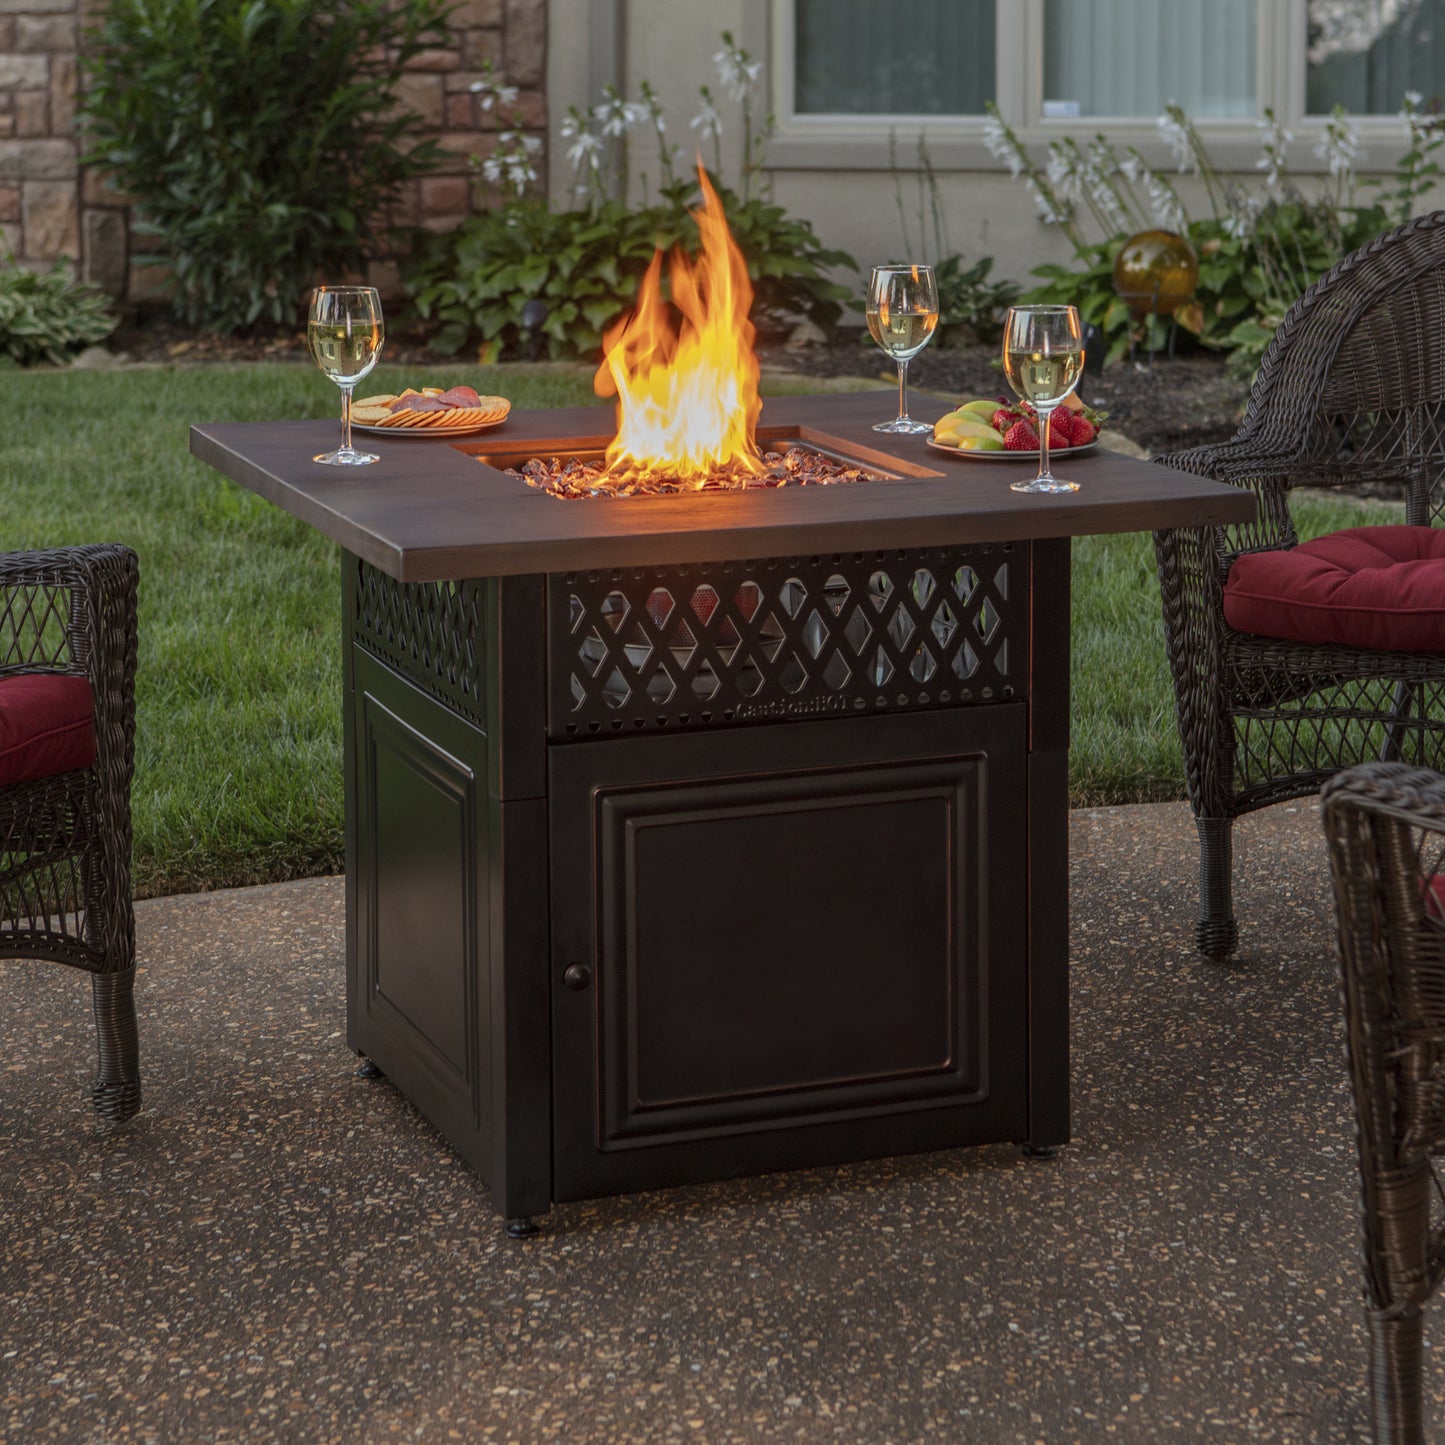 Endless Summer The Donovan, Dual Heat LP Gas Outdoor Fire Pit/Patio Heater with Wood Look Resin Mantel GAD19102ES freeshipping - Luxury Tech Inc.